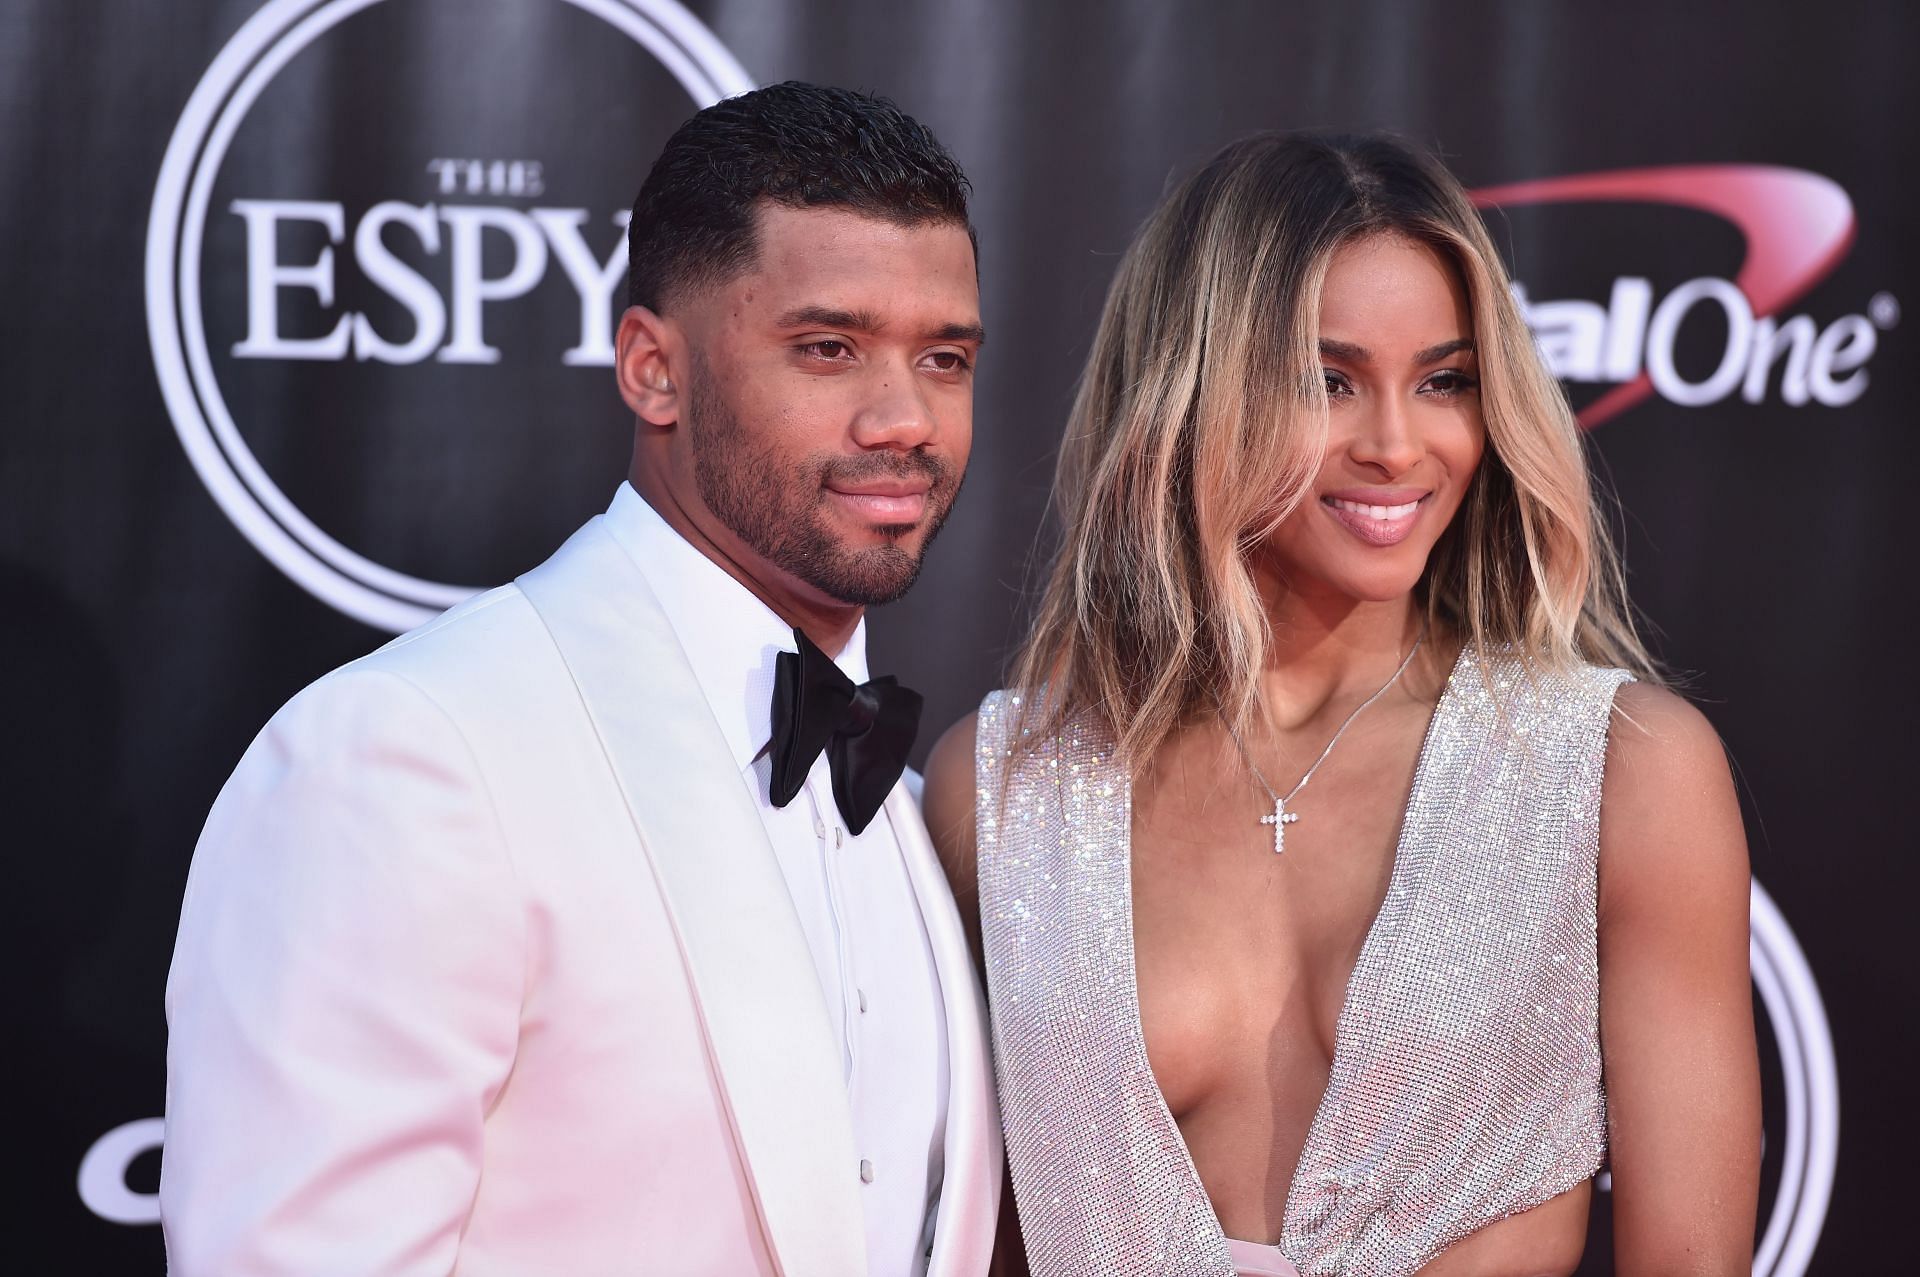 The power couple at The 2016 ESPYS